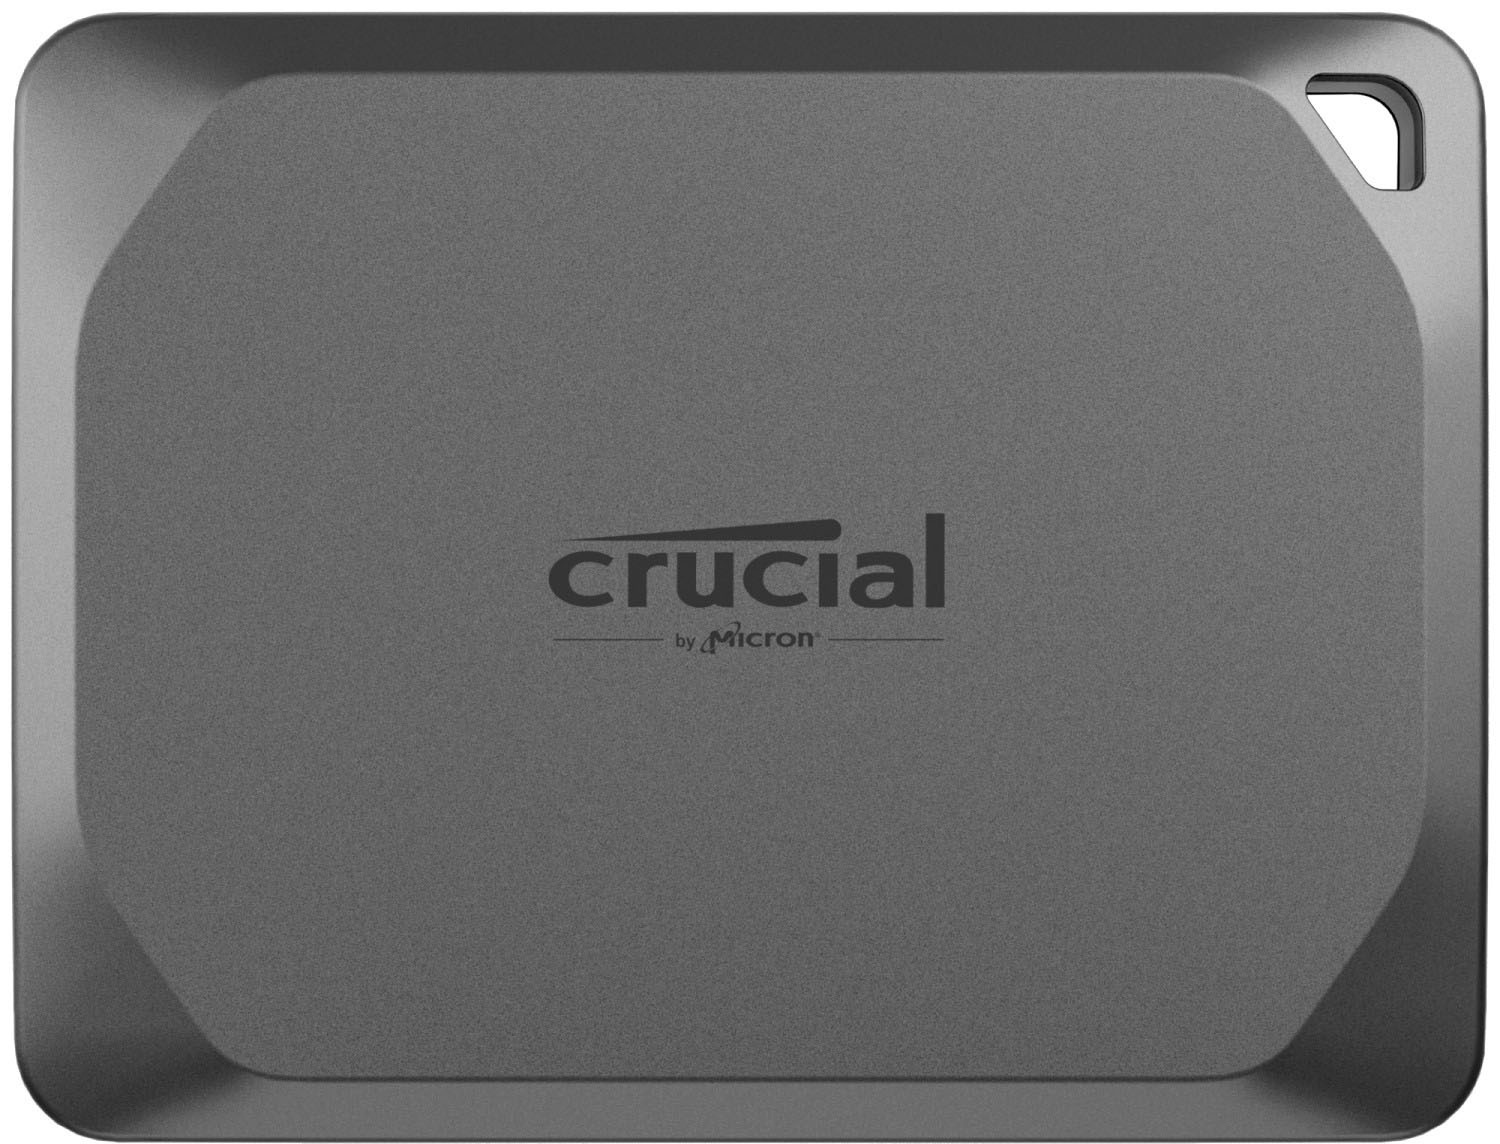 Crucial launches 4TB portable SSD at under $400 - 9to5Toys